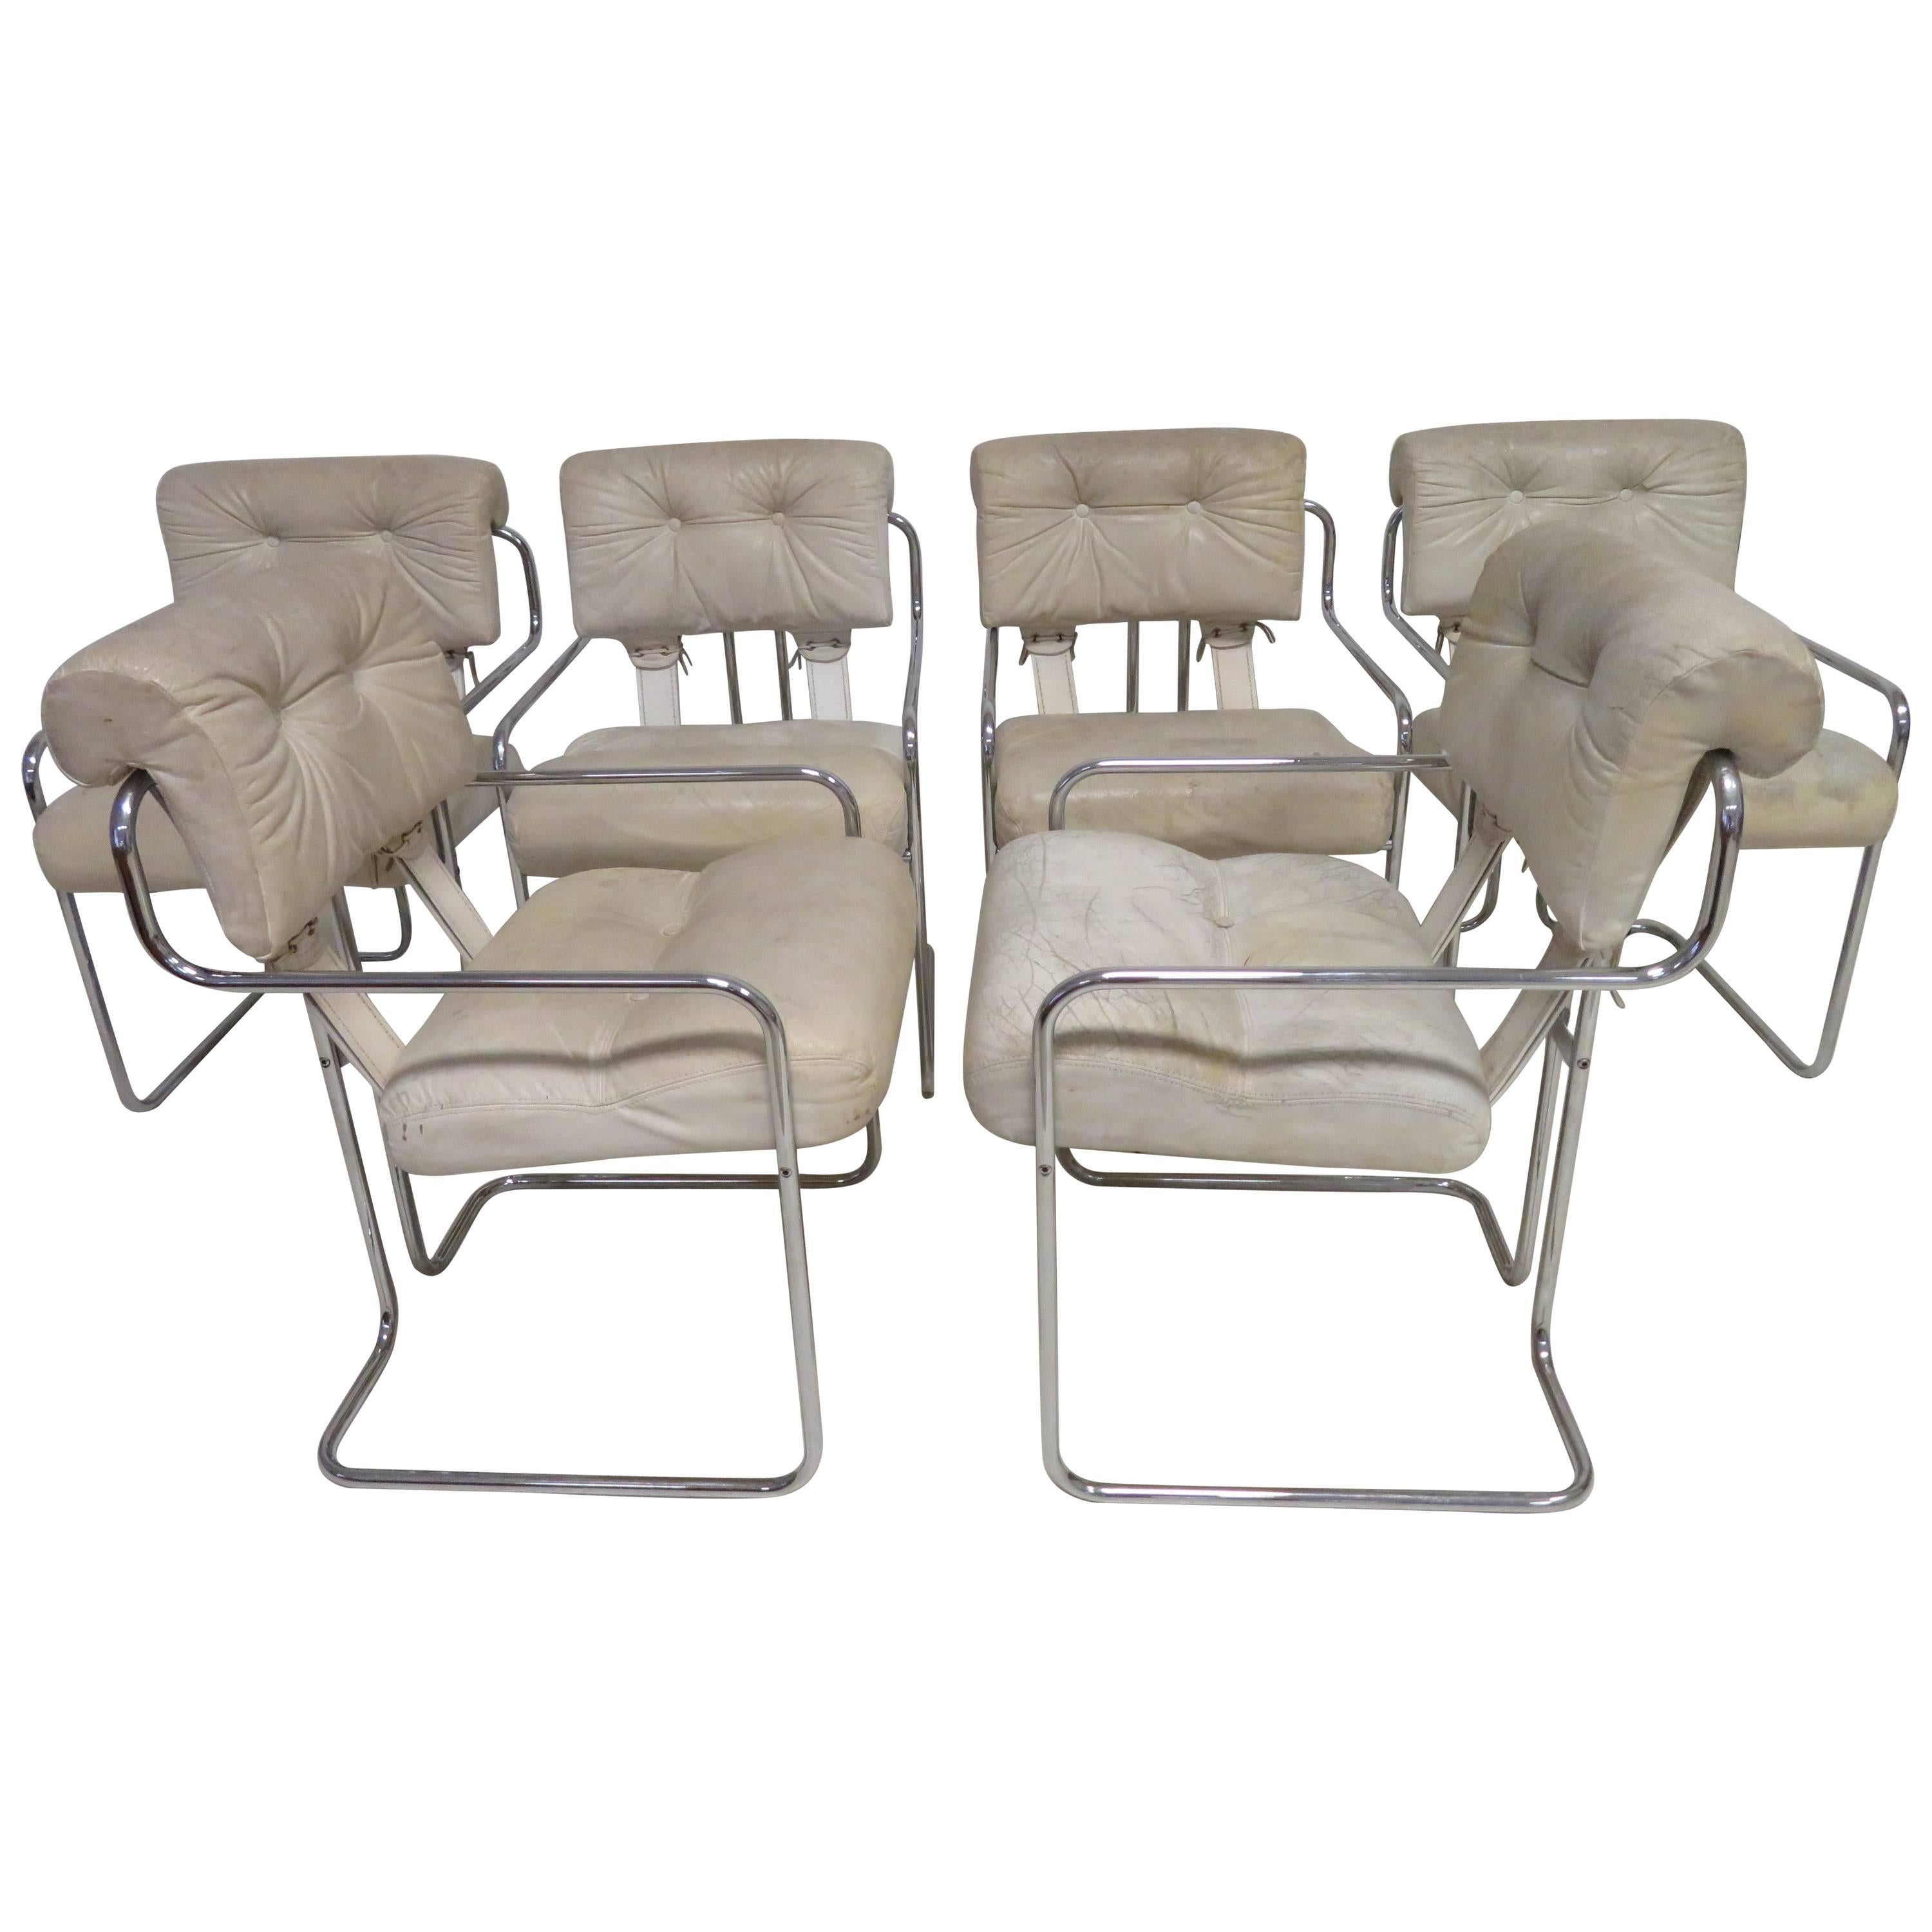 Nice Set of Six Mariani for Pace "Tucroma" Dining Chairs, Mid-Century Modern